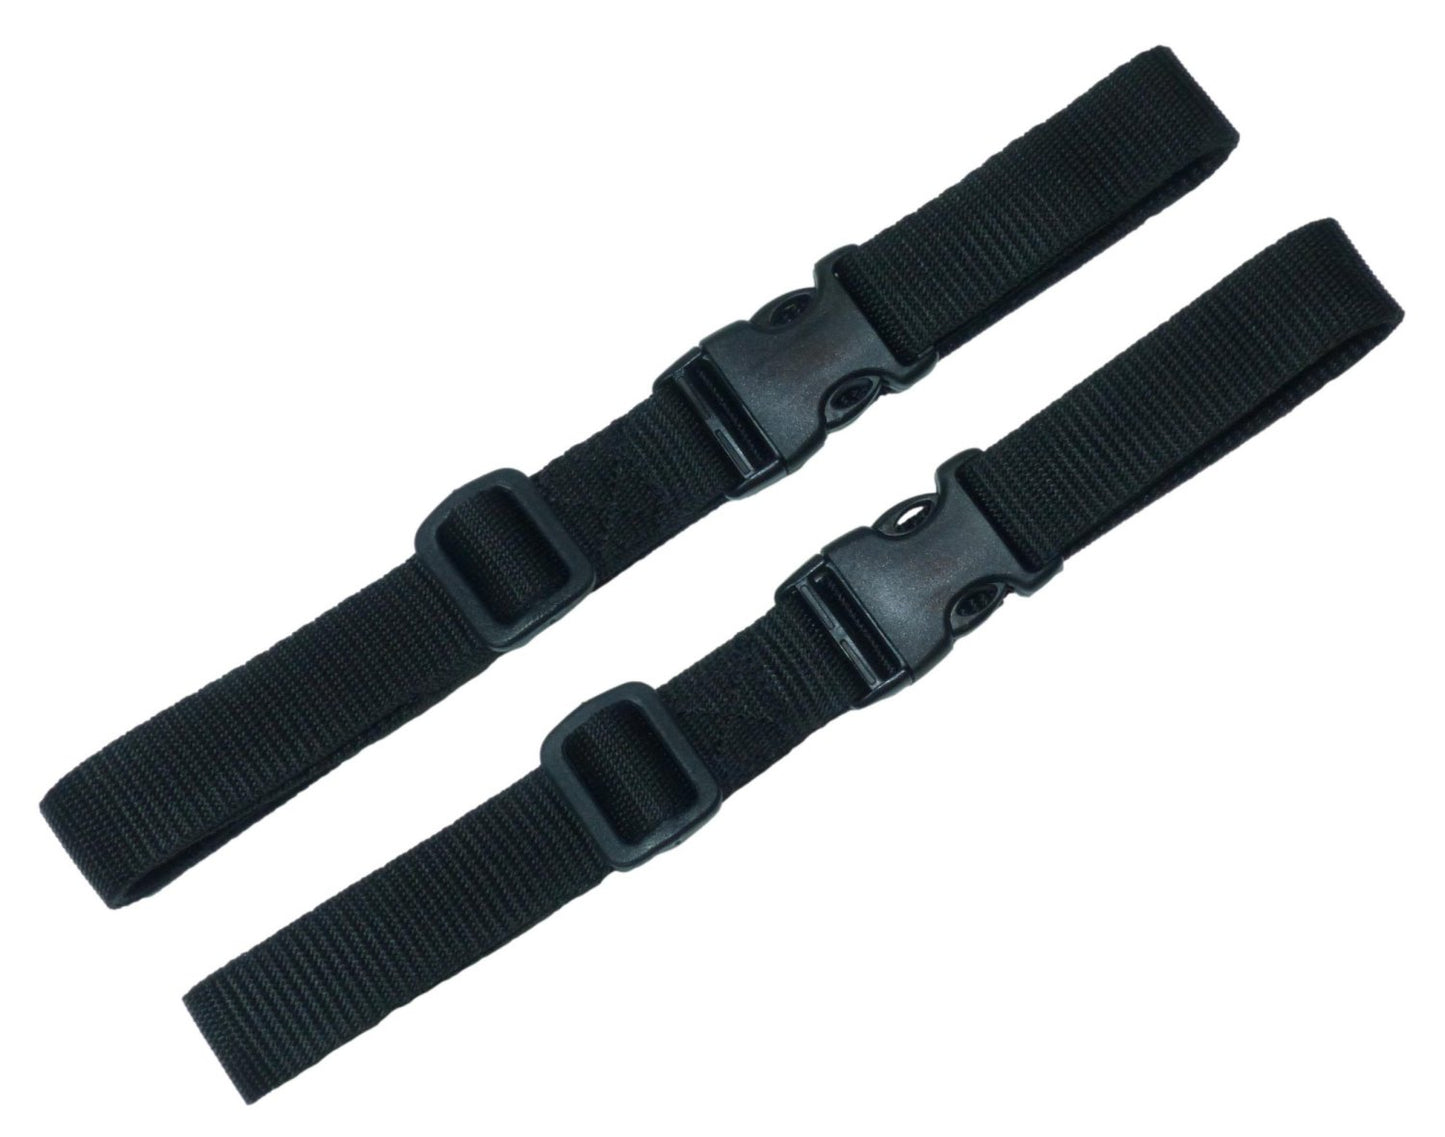 Benristraps 25mm Webbing Strap with Quick Release & Length-Adjusting Buckles (Pair) in black